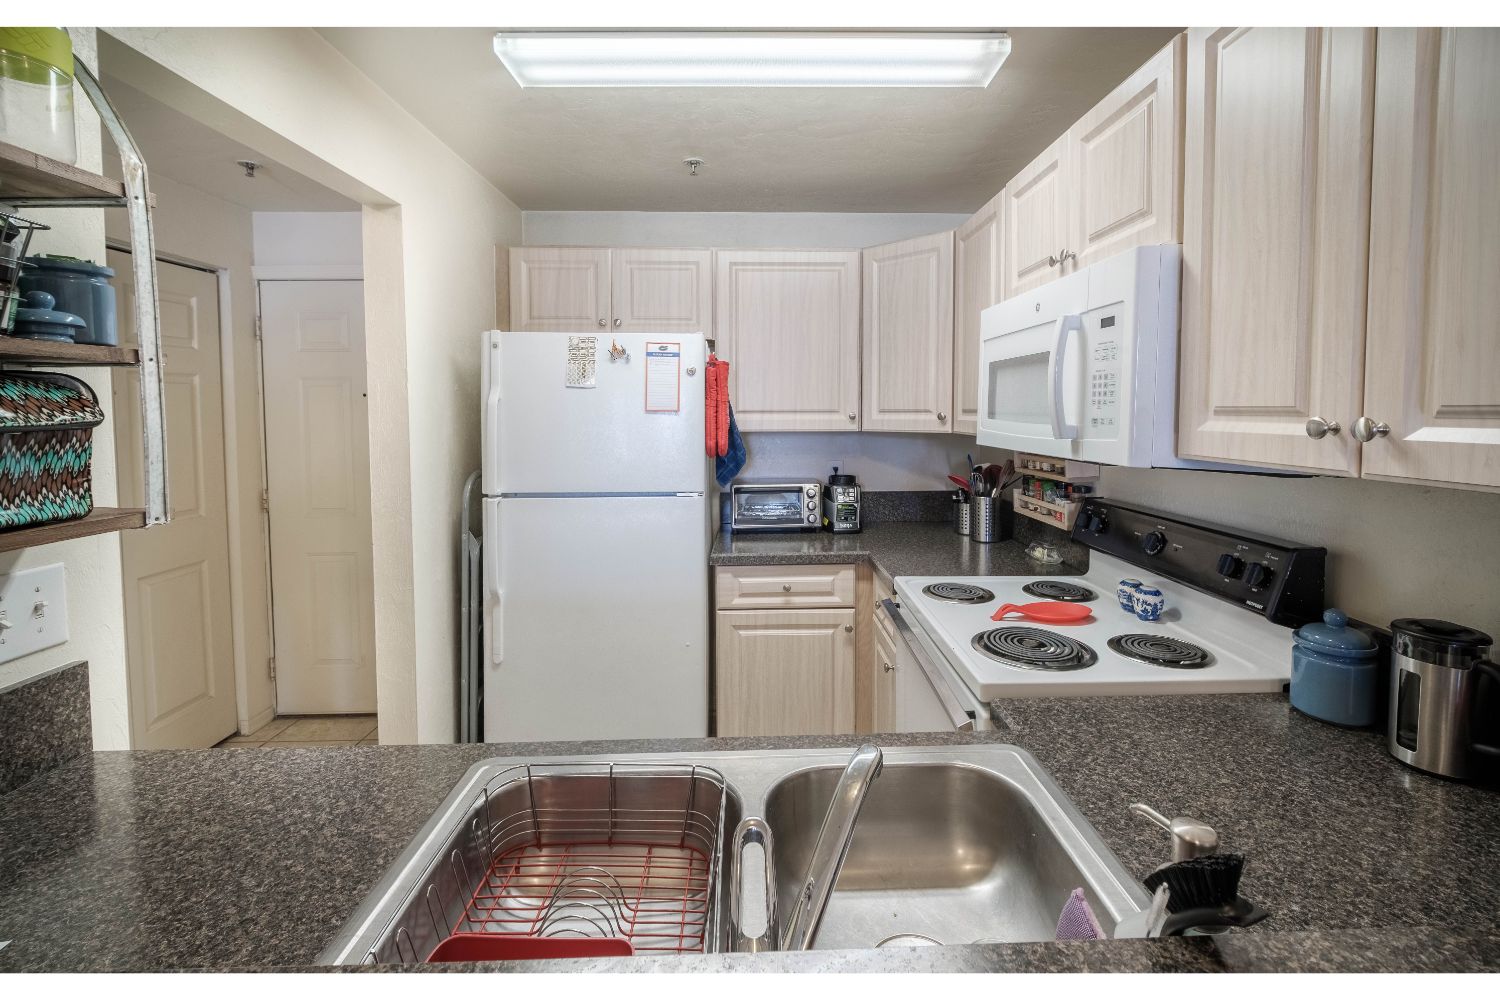 These apartments are upgraded with oversized tile floors, granite style countertops, soft-touch drawers, new cabinetry, appliances, fixtures and more!